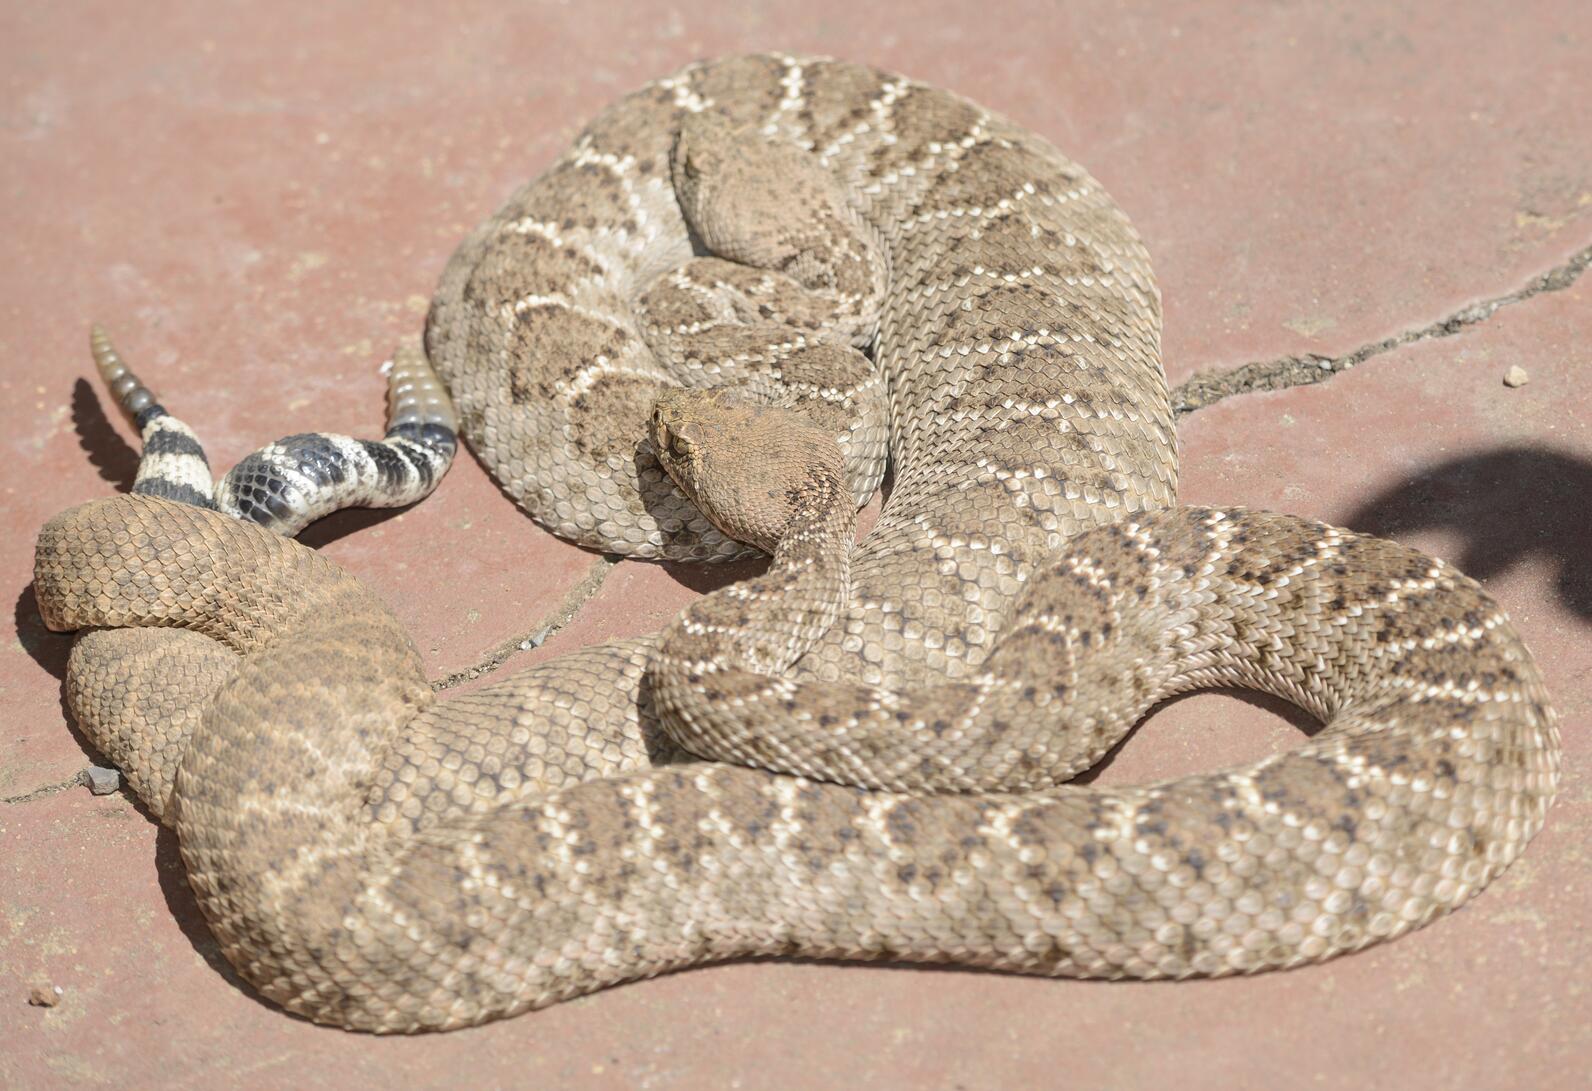 A pair of western diamondbacks, large, sandy-brown rattlesnakes with black-and-white banded tails, coiled together with their tails intwined.